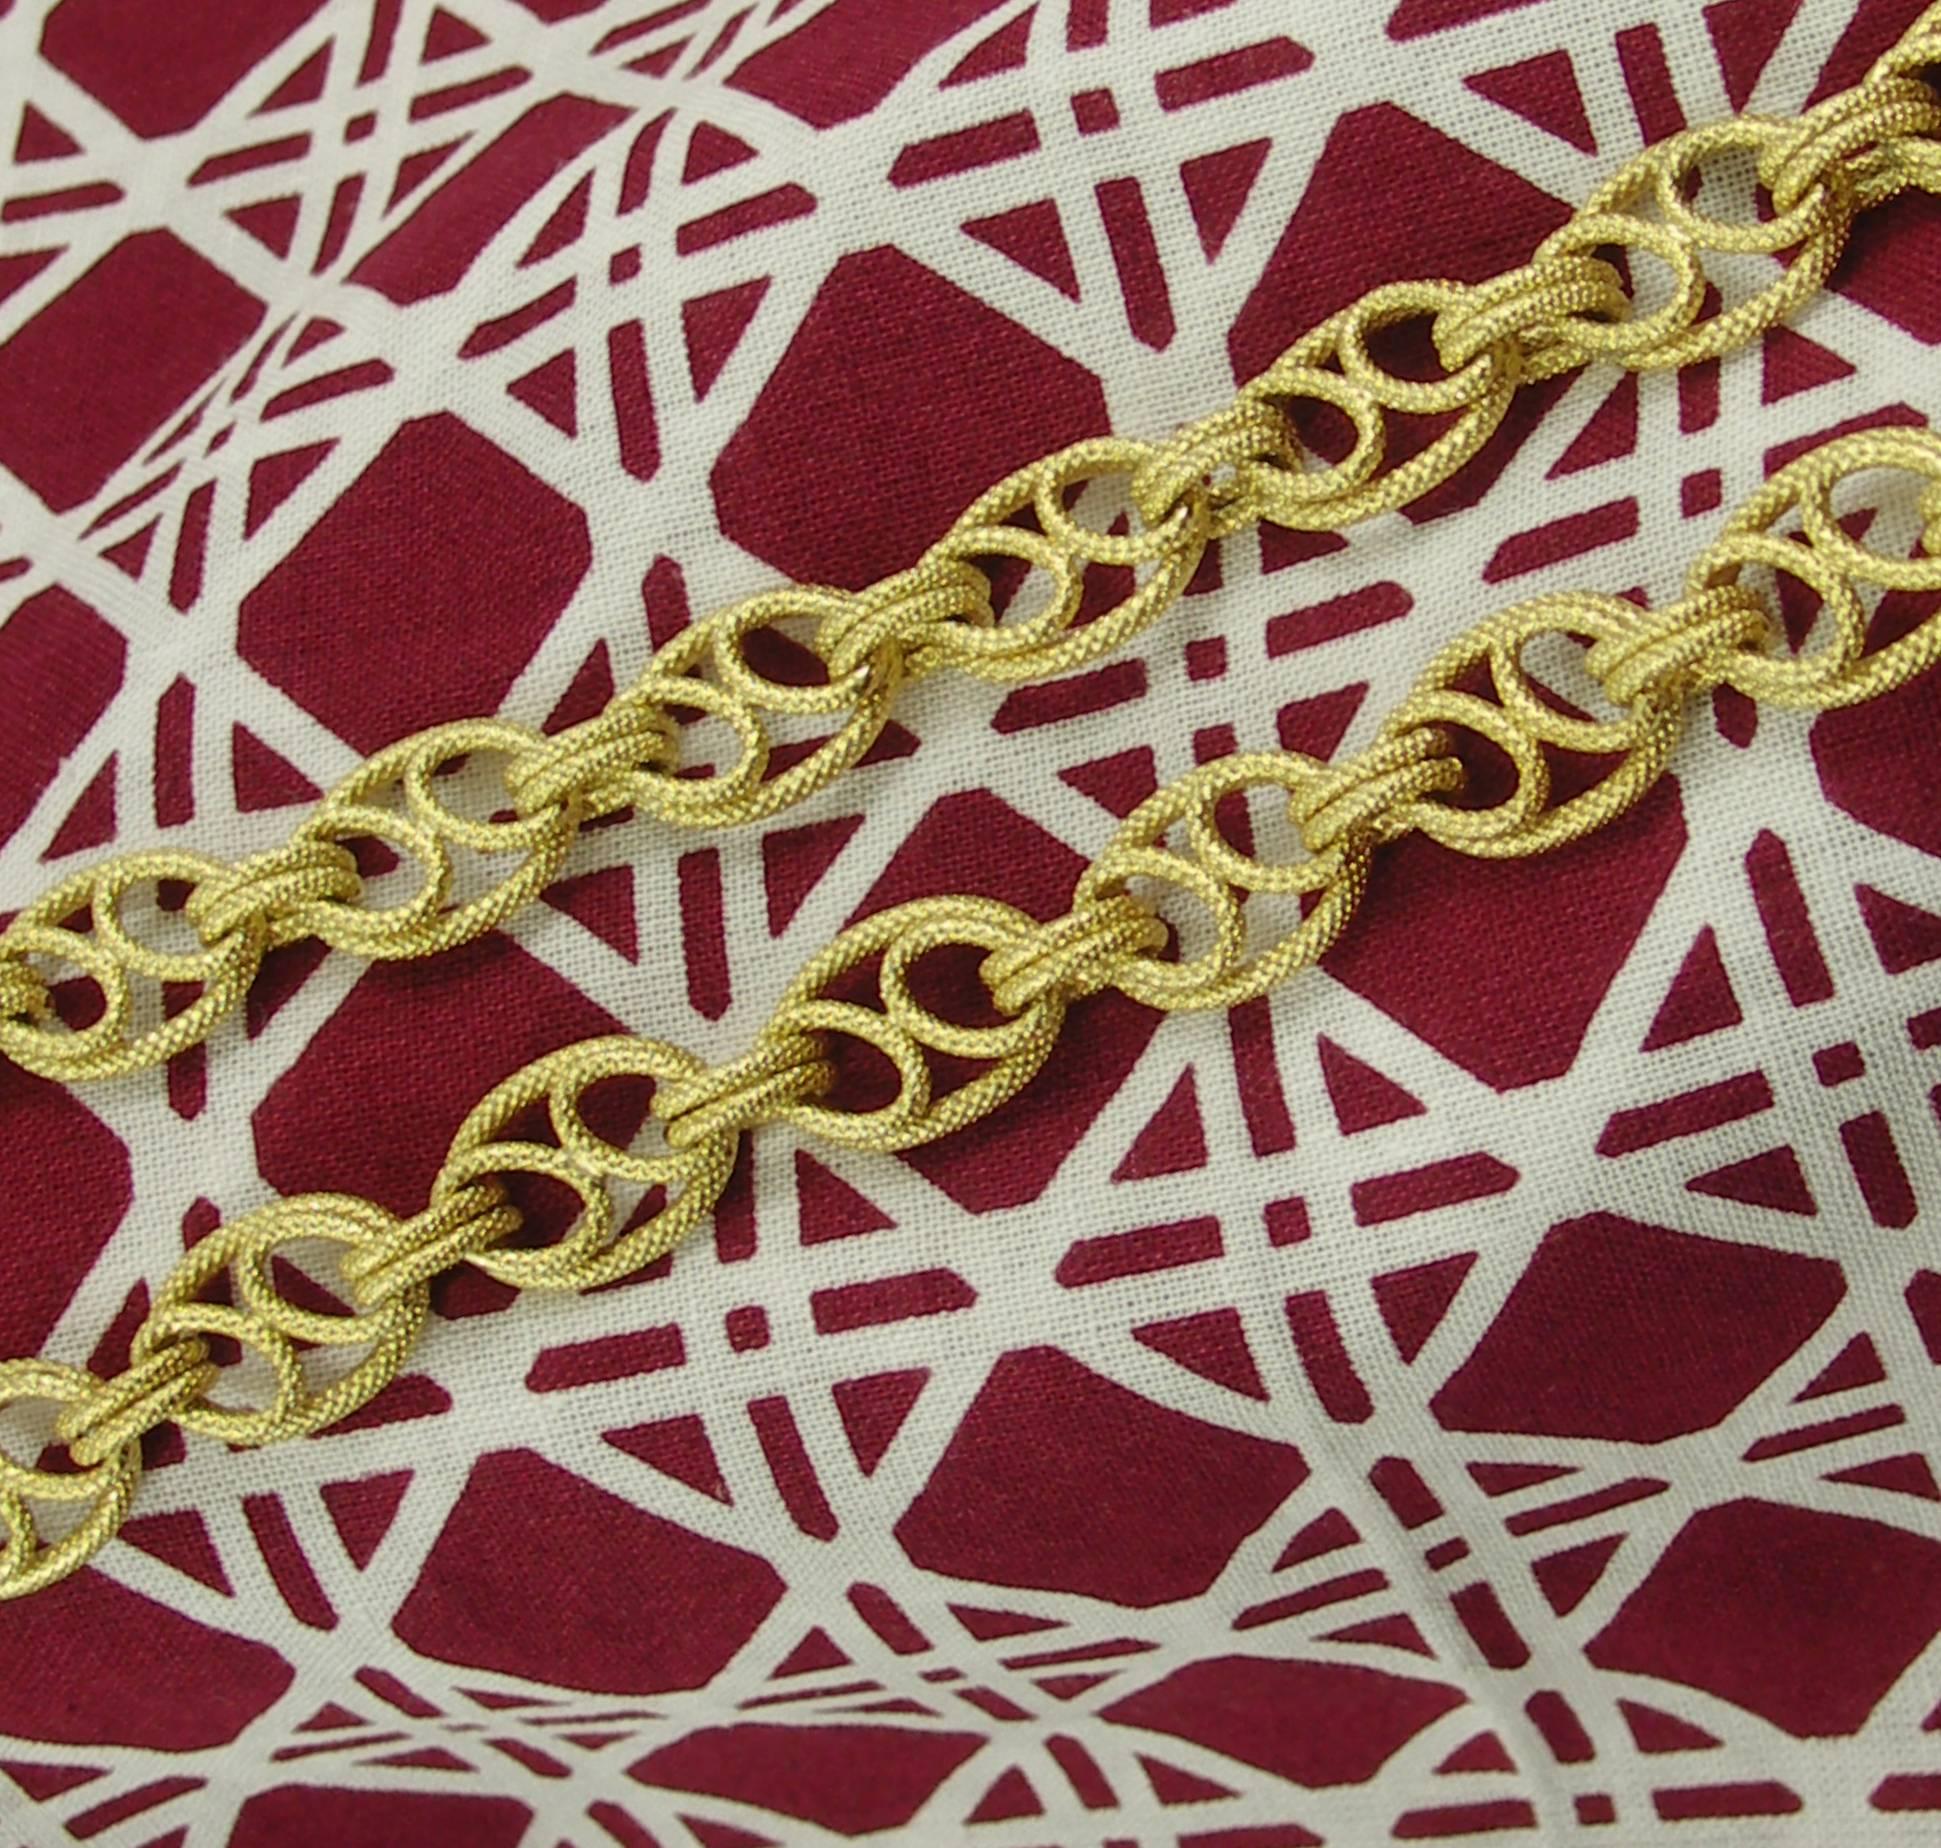 Women's Stippled Yellow Gold Link Necklace